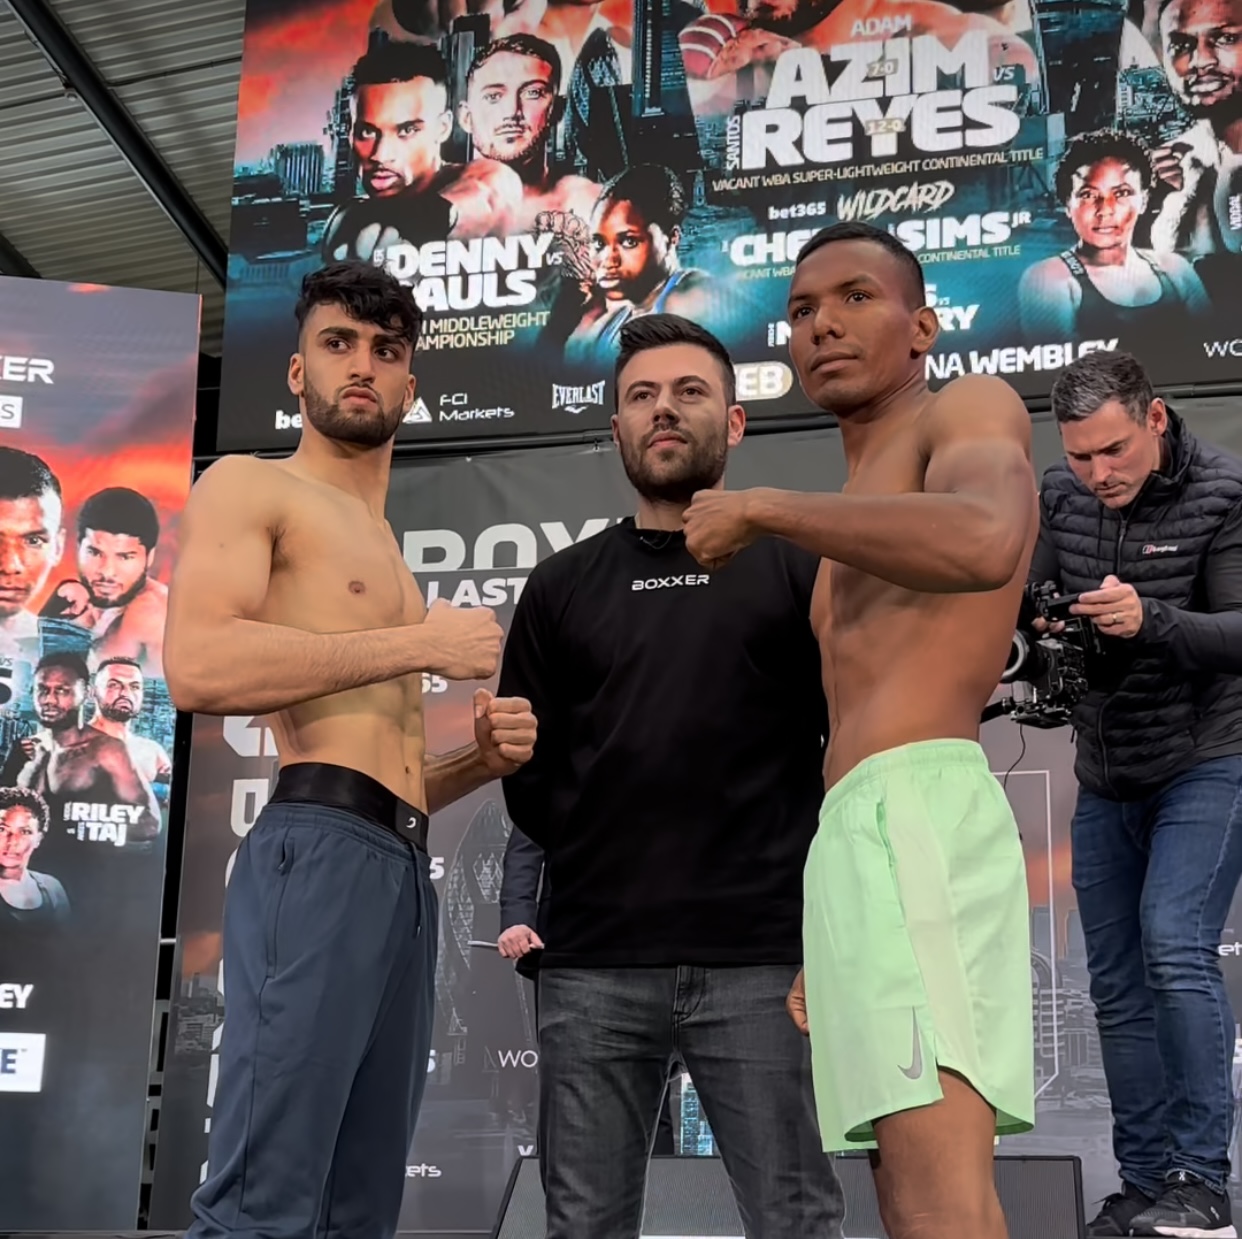 Azim-Reyes will fight for the WBA-Continental crown at Wembley on Saturday